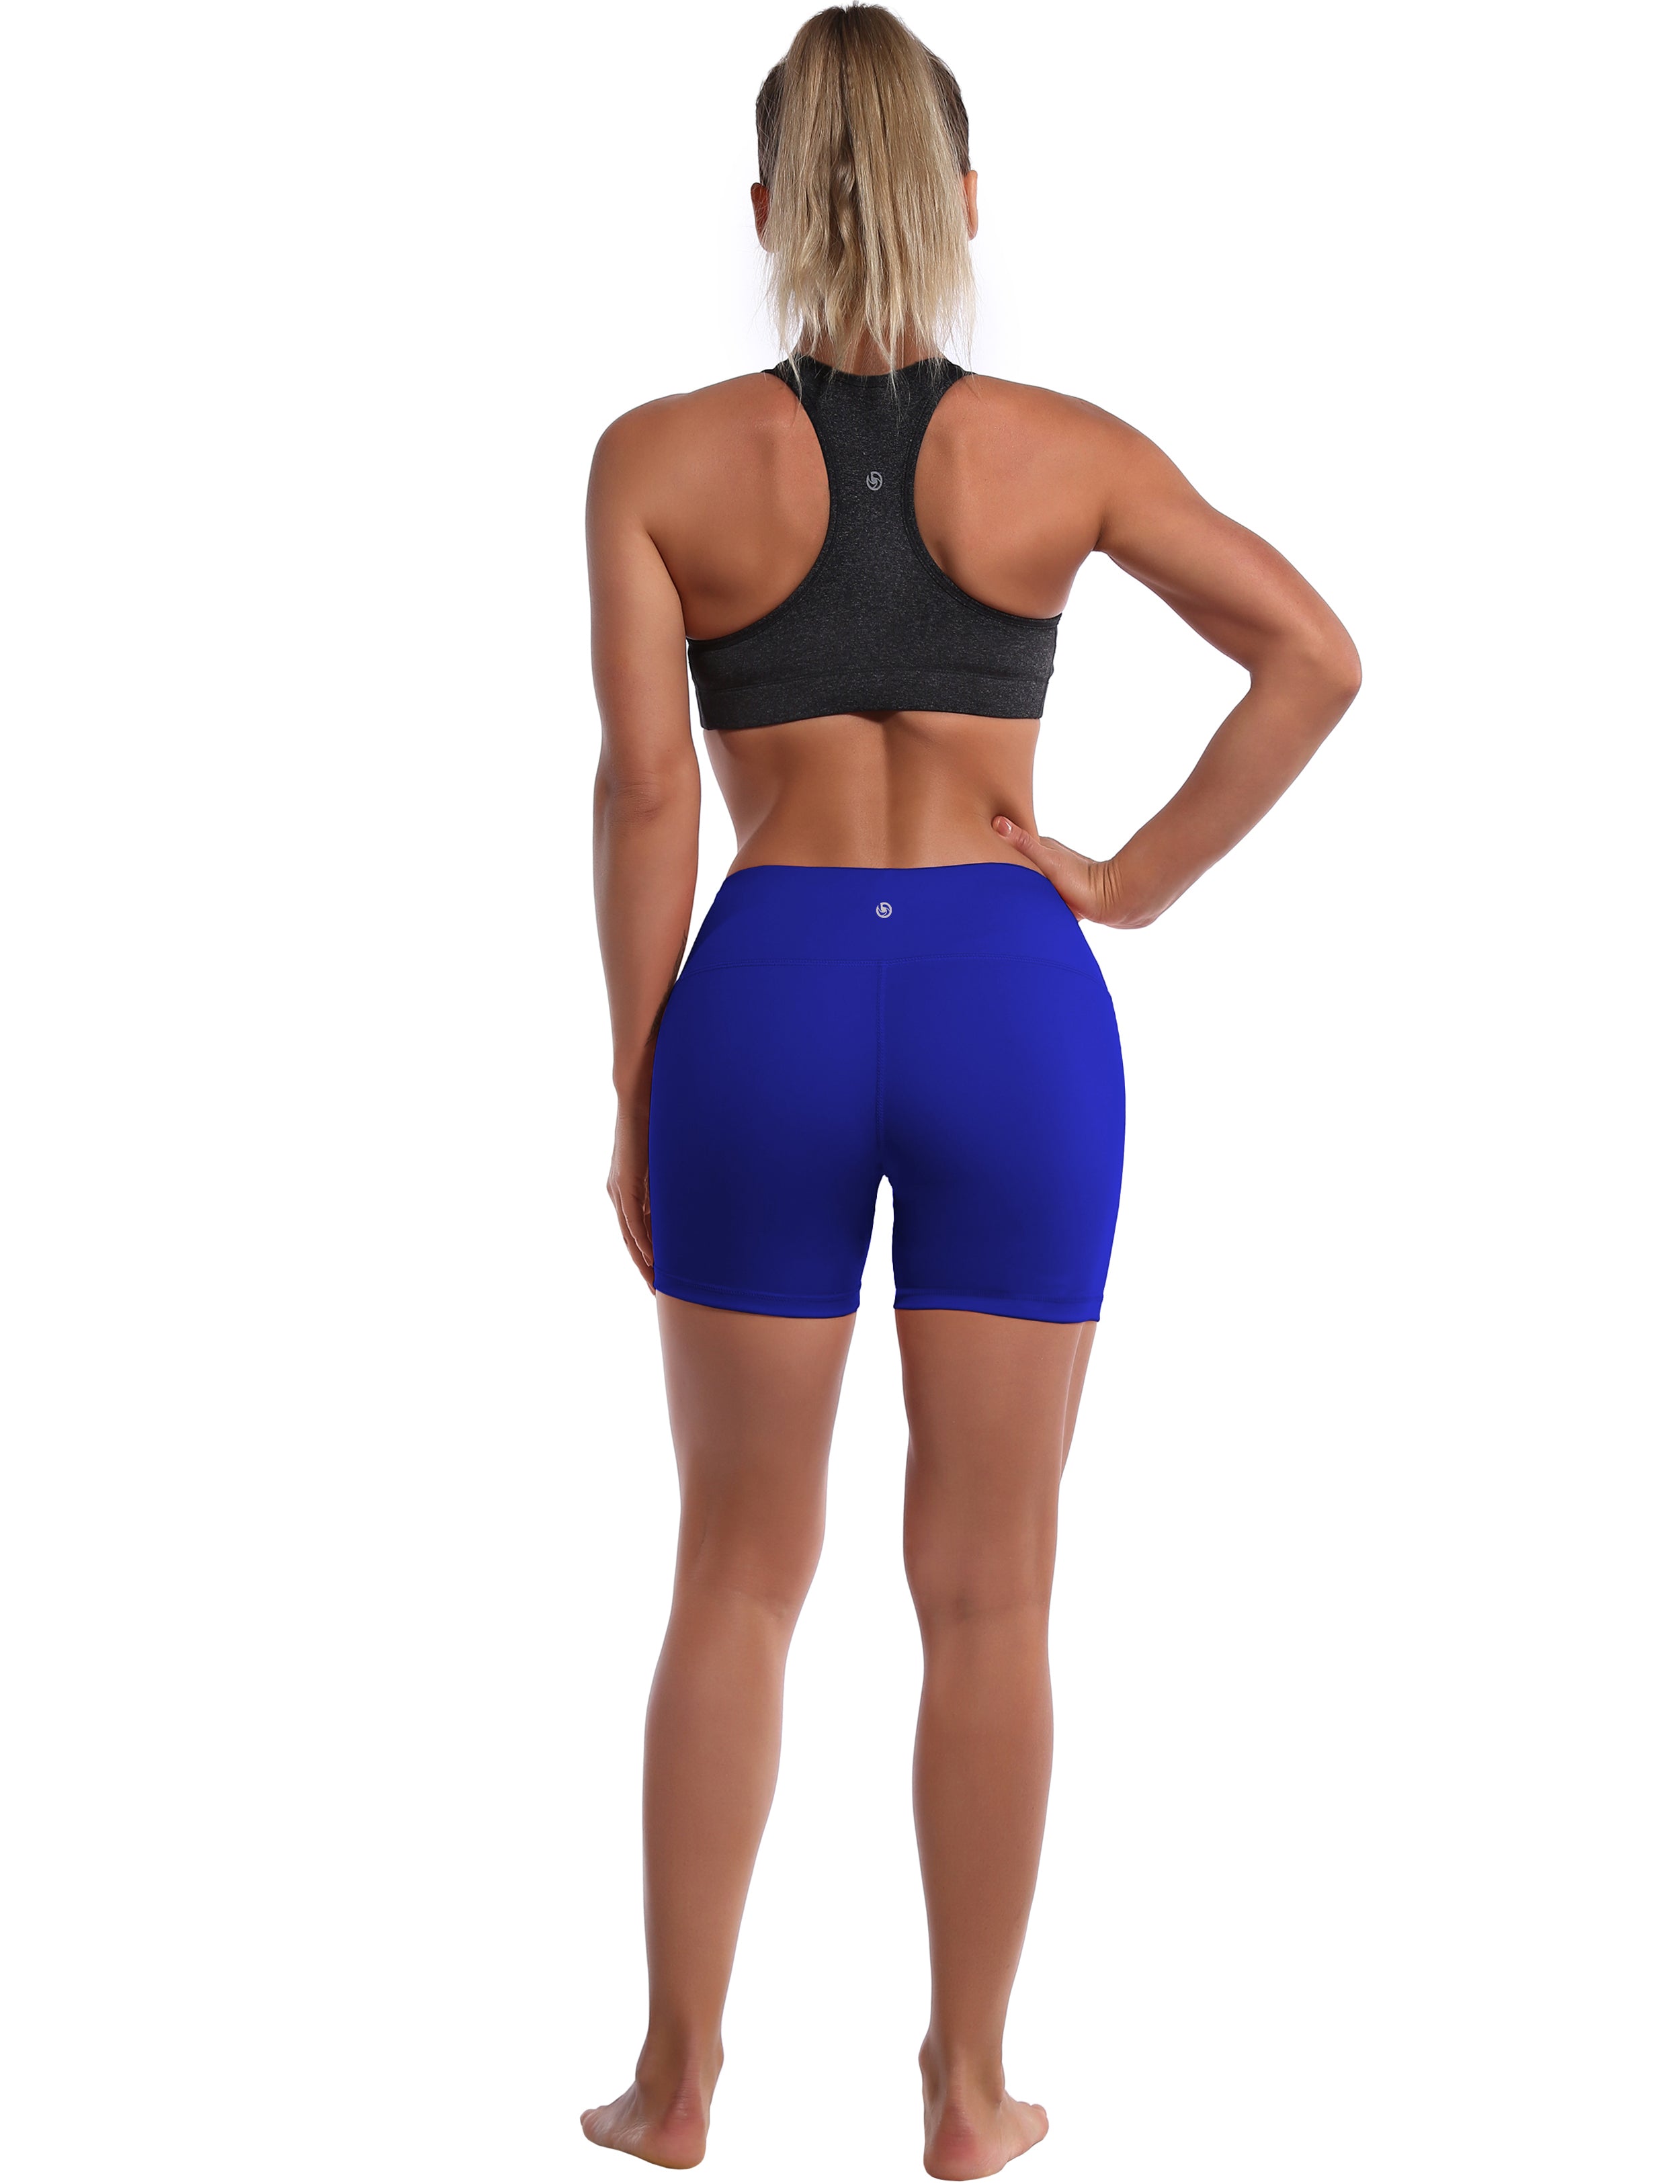 4" Jogging Shorts navy Sleek, soft, smooth and totally comfortable: our newest style is here. Softest-ever fabric High elasticity High density 4-way stretch Fabric doesn't attract lint easily No see-through Moisture-wicking Machine wash 75% Nylon, 25% Spandex